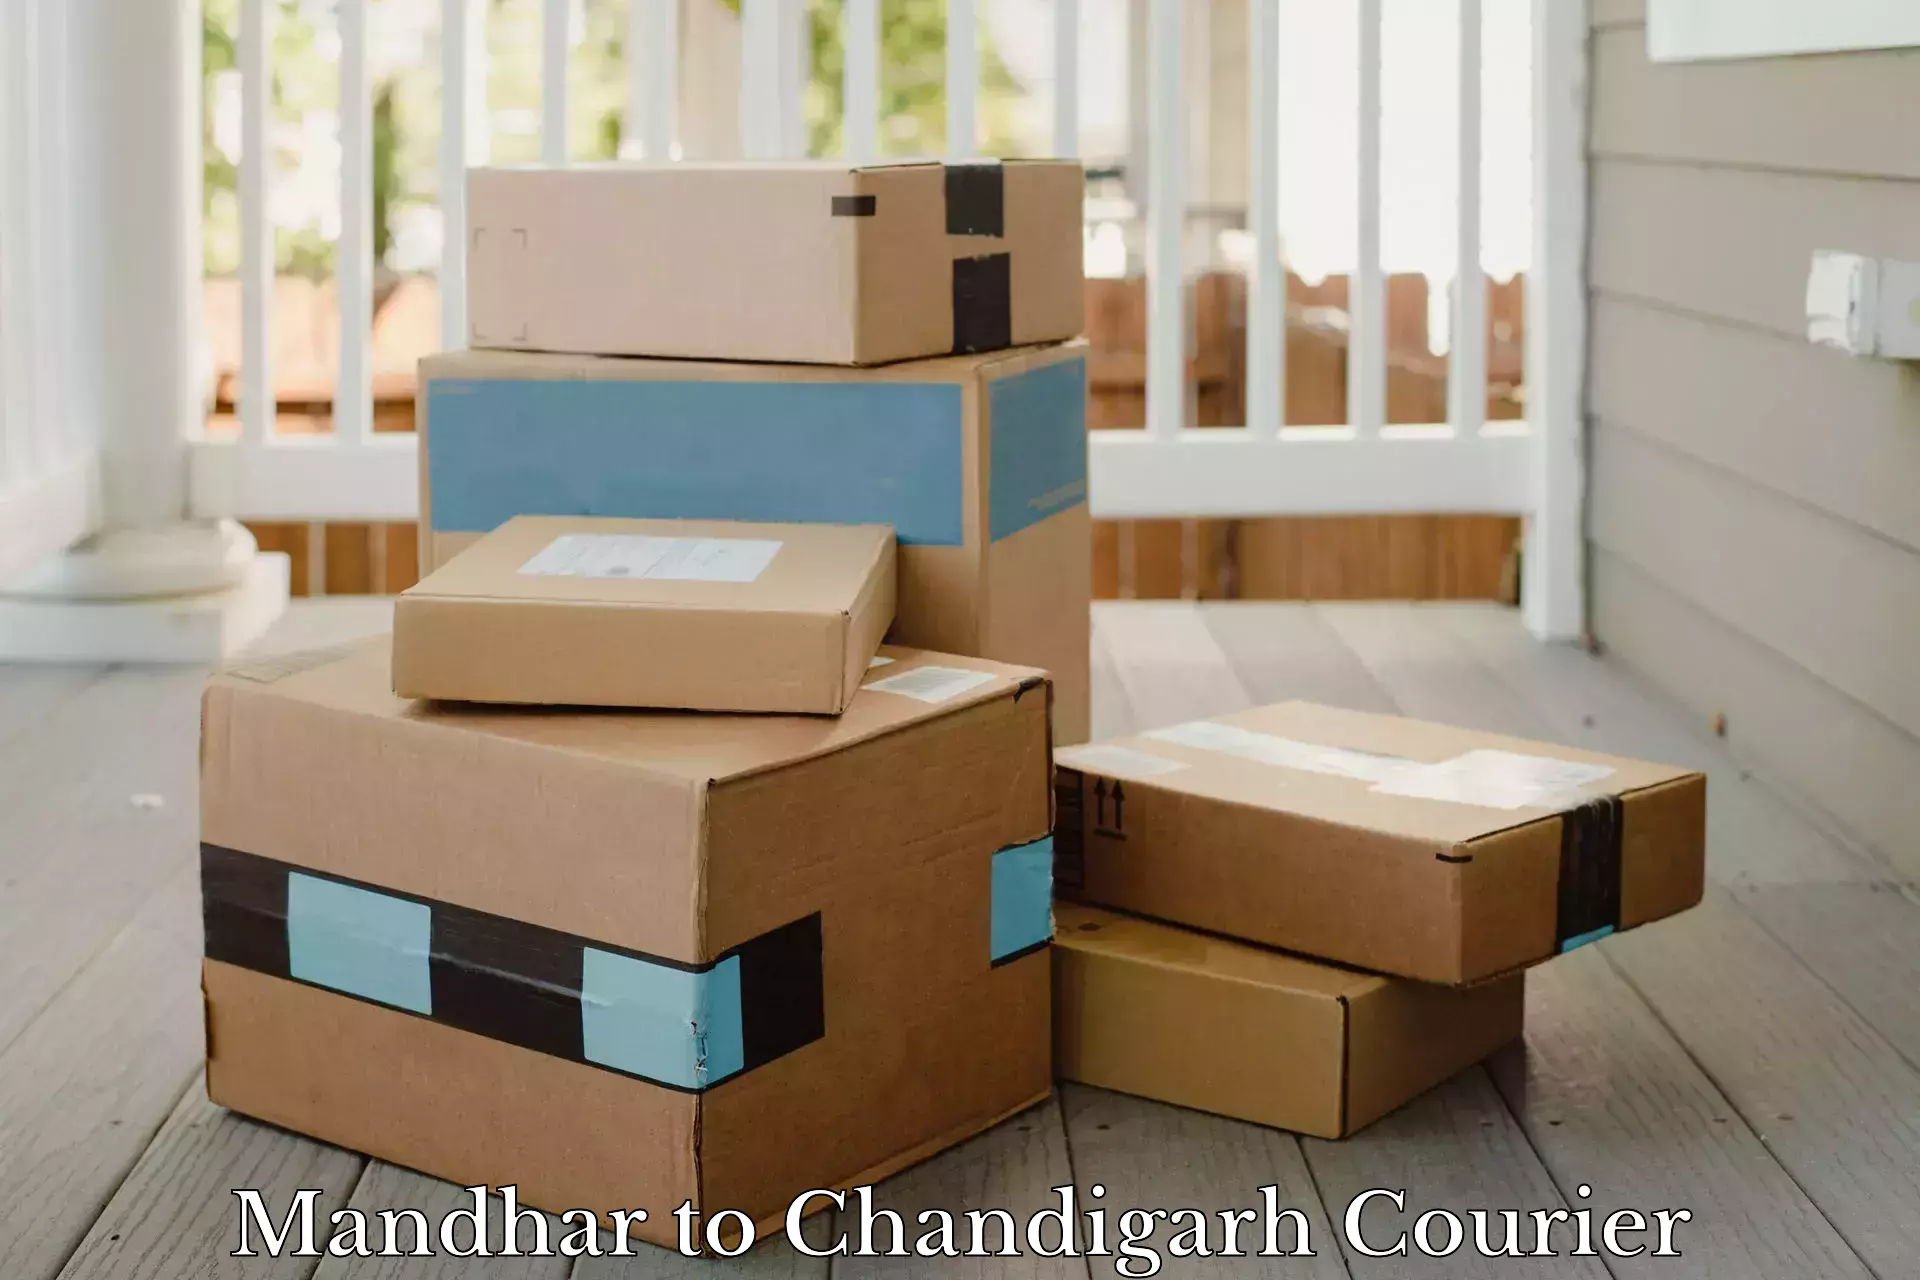 Express delivery capabilities in Mandhar to Chandigarh